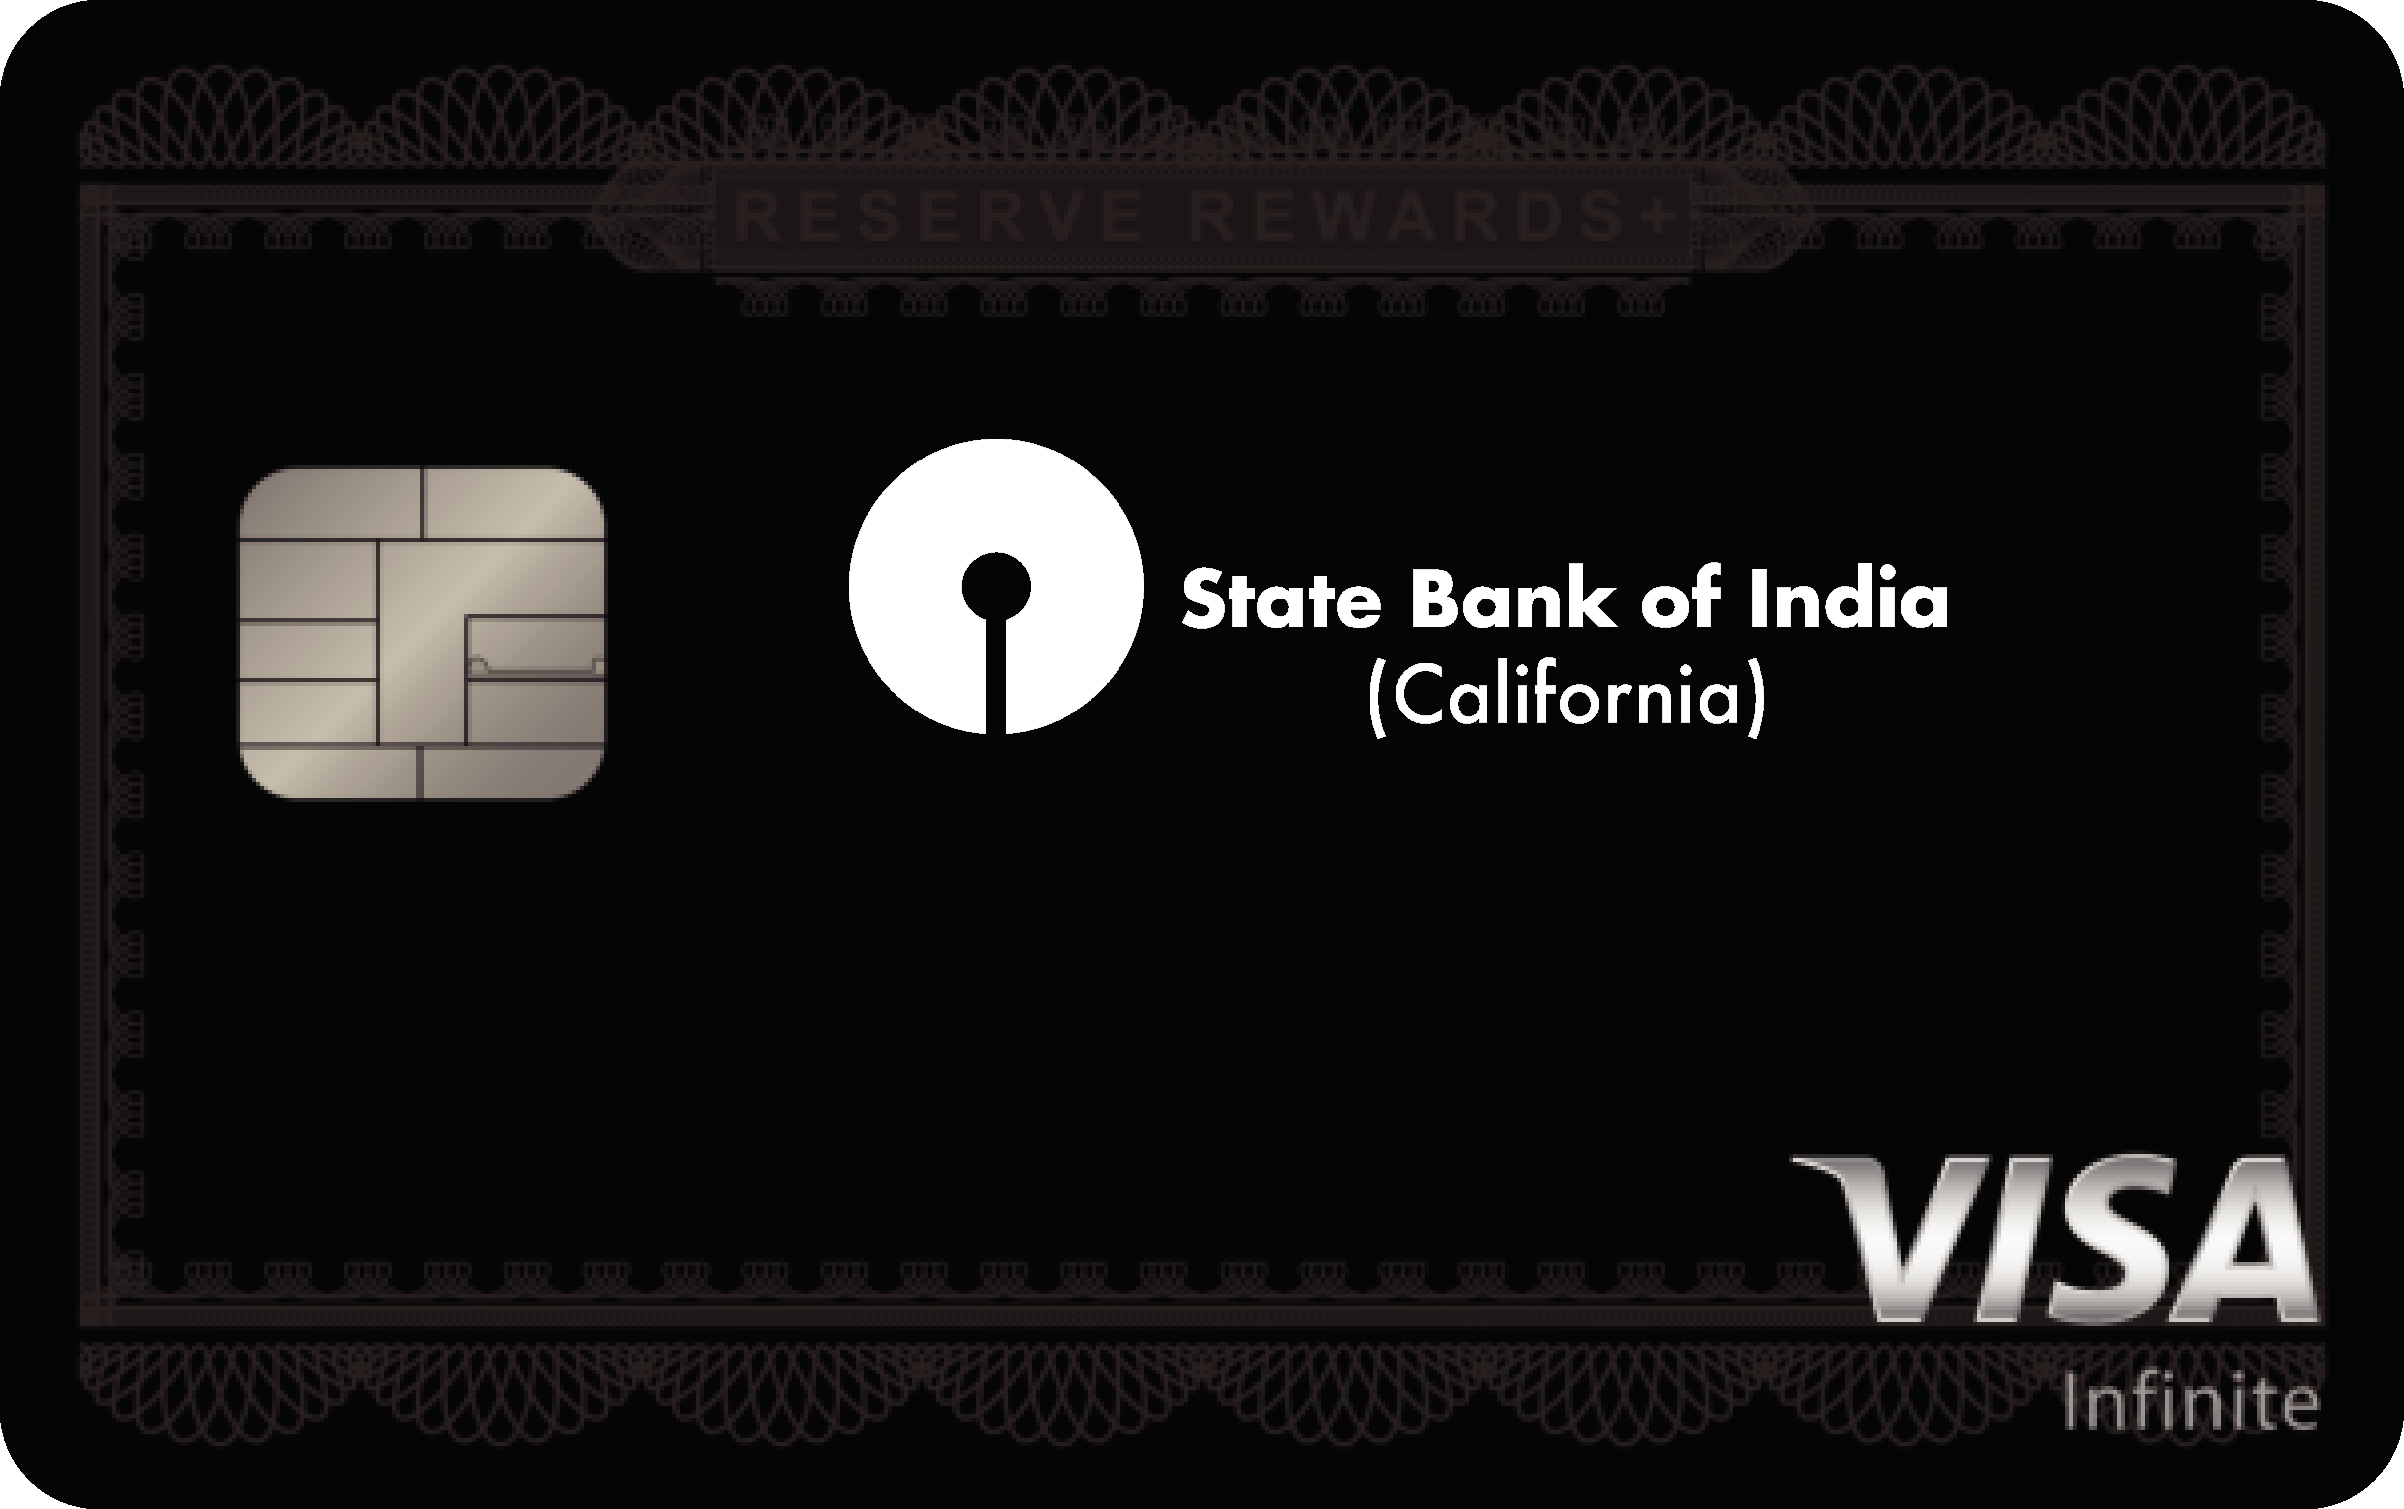 State Bank of India (California)